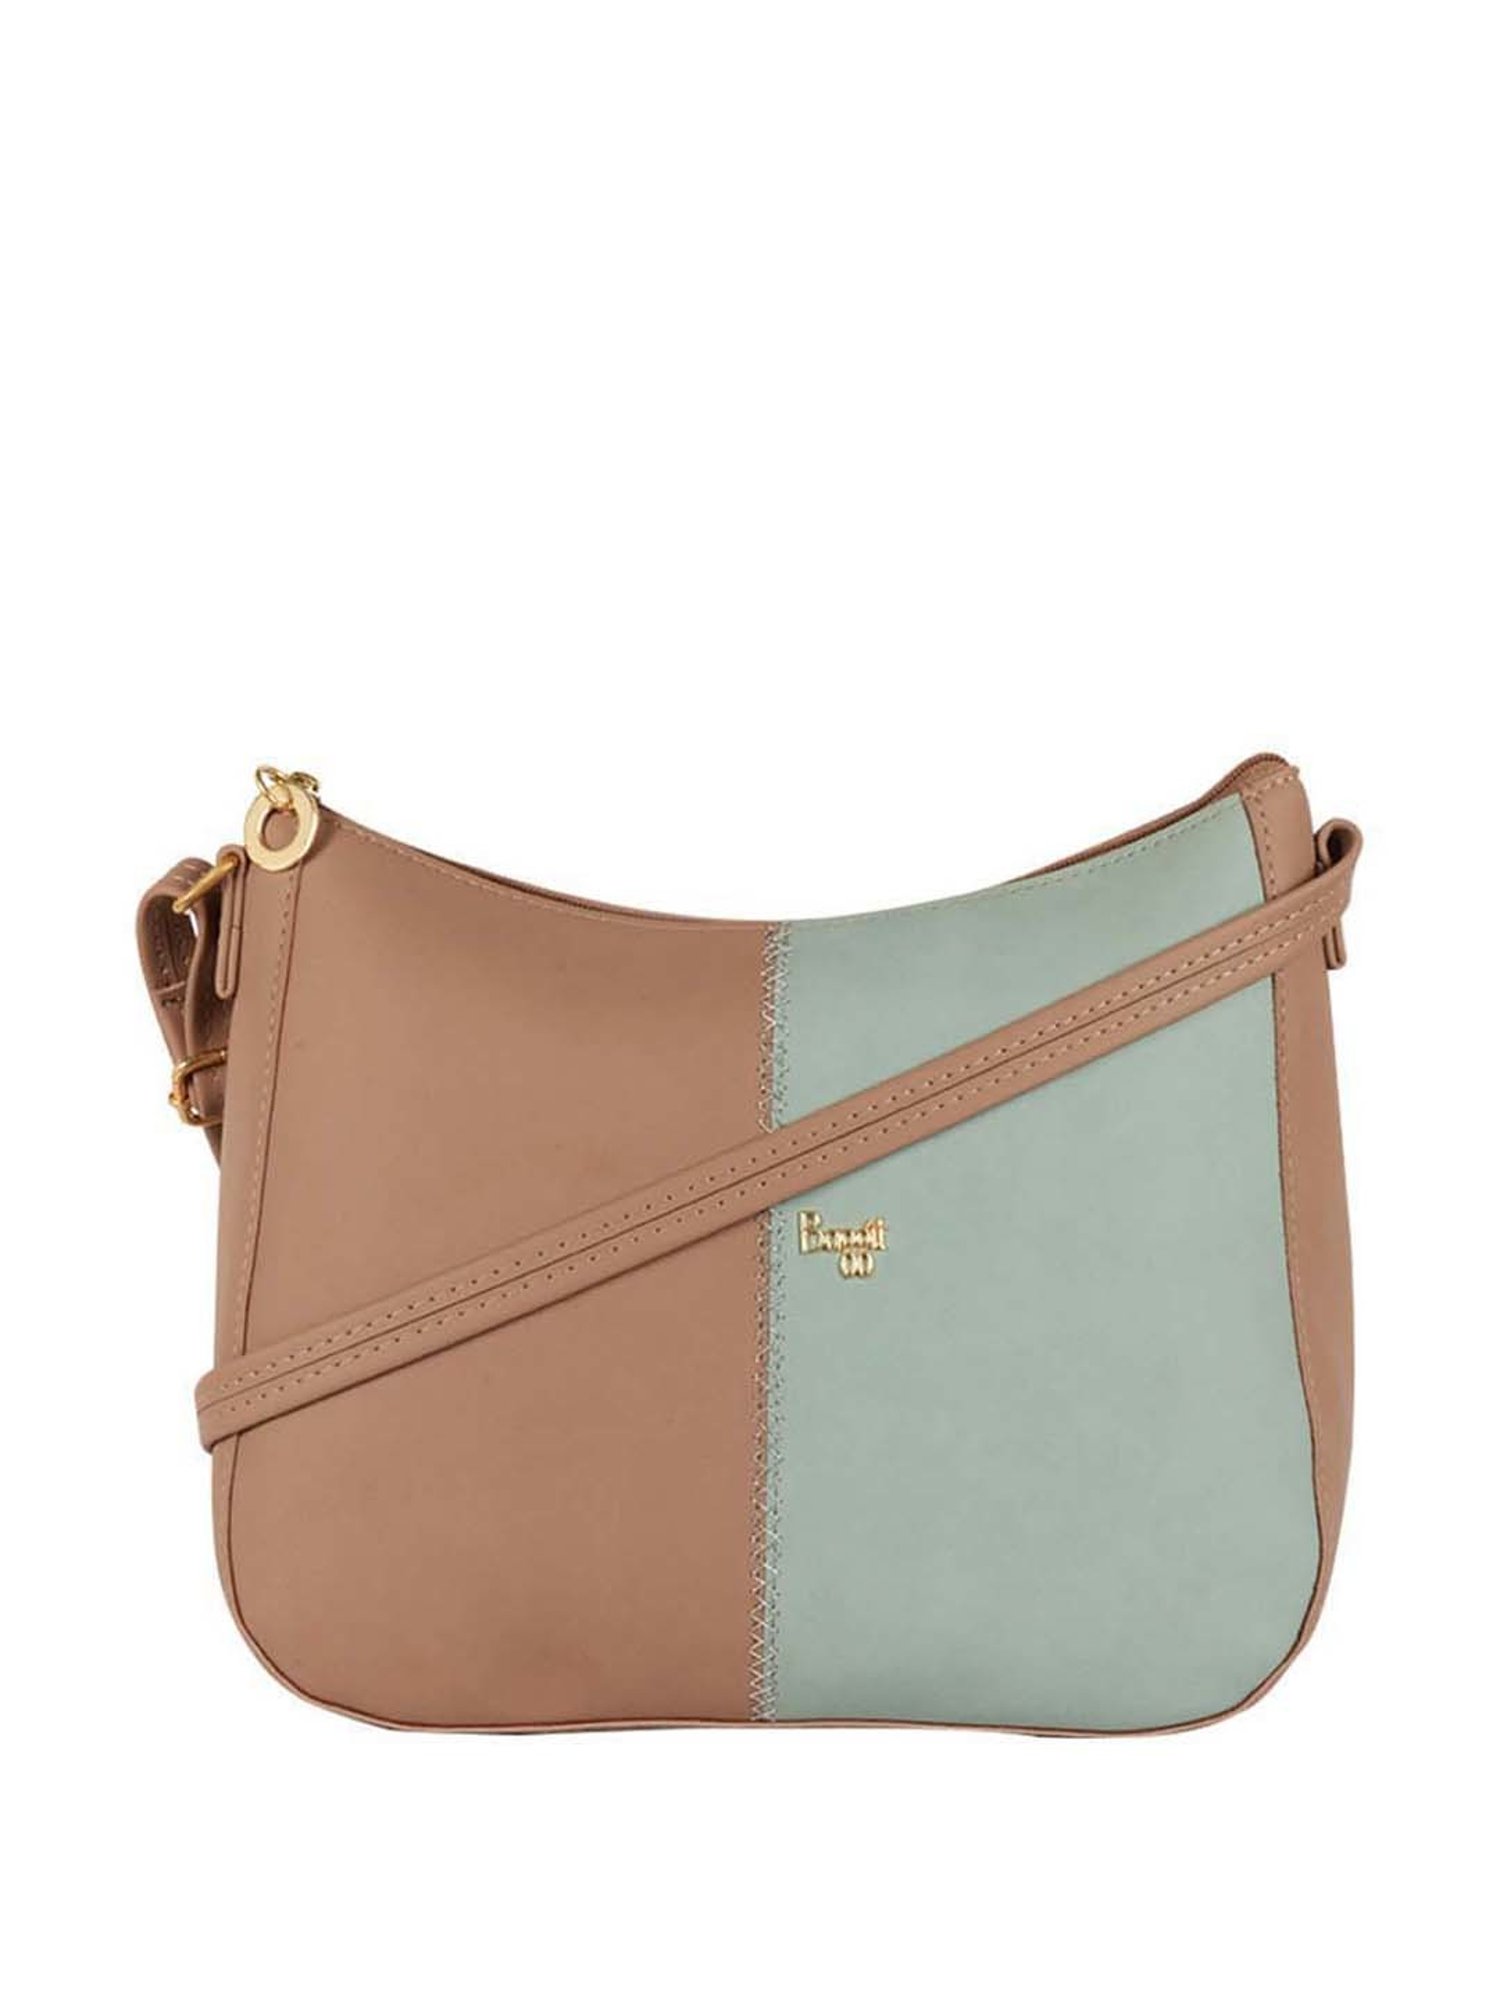 Many Options] Baggit Bags, Wallets, Handbags Min 70% to 80% Off From Rs.357  @ Amazon